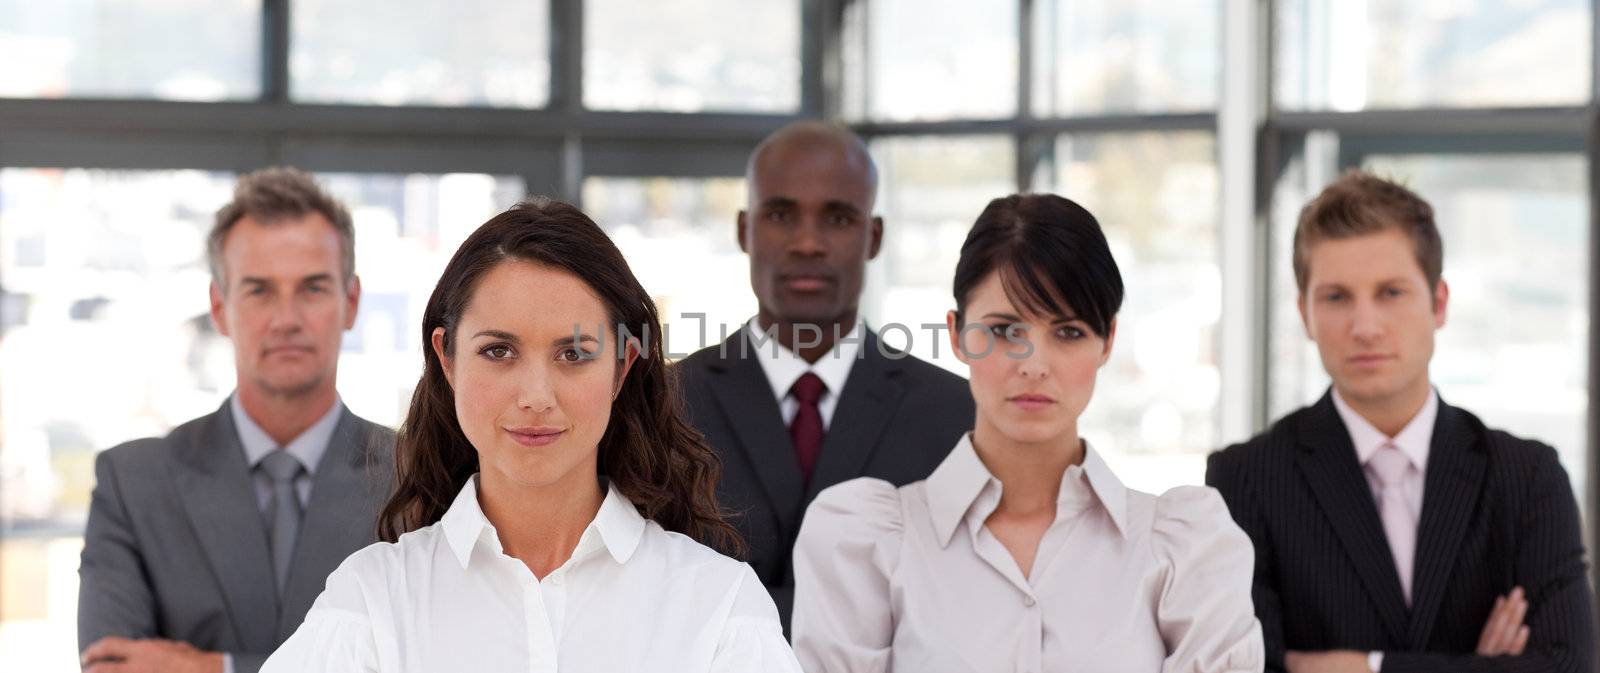 Portrait of multi-ethnic business people looking at the camera  by Wavebreakmedia